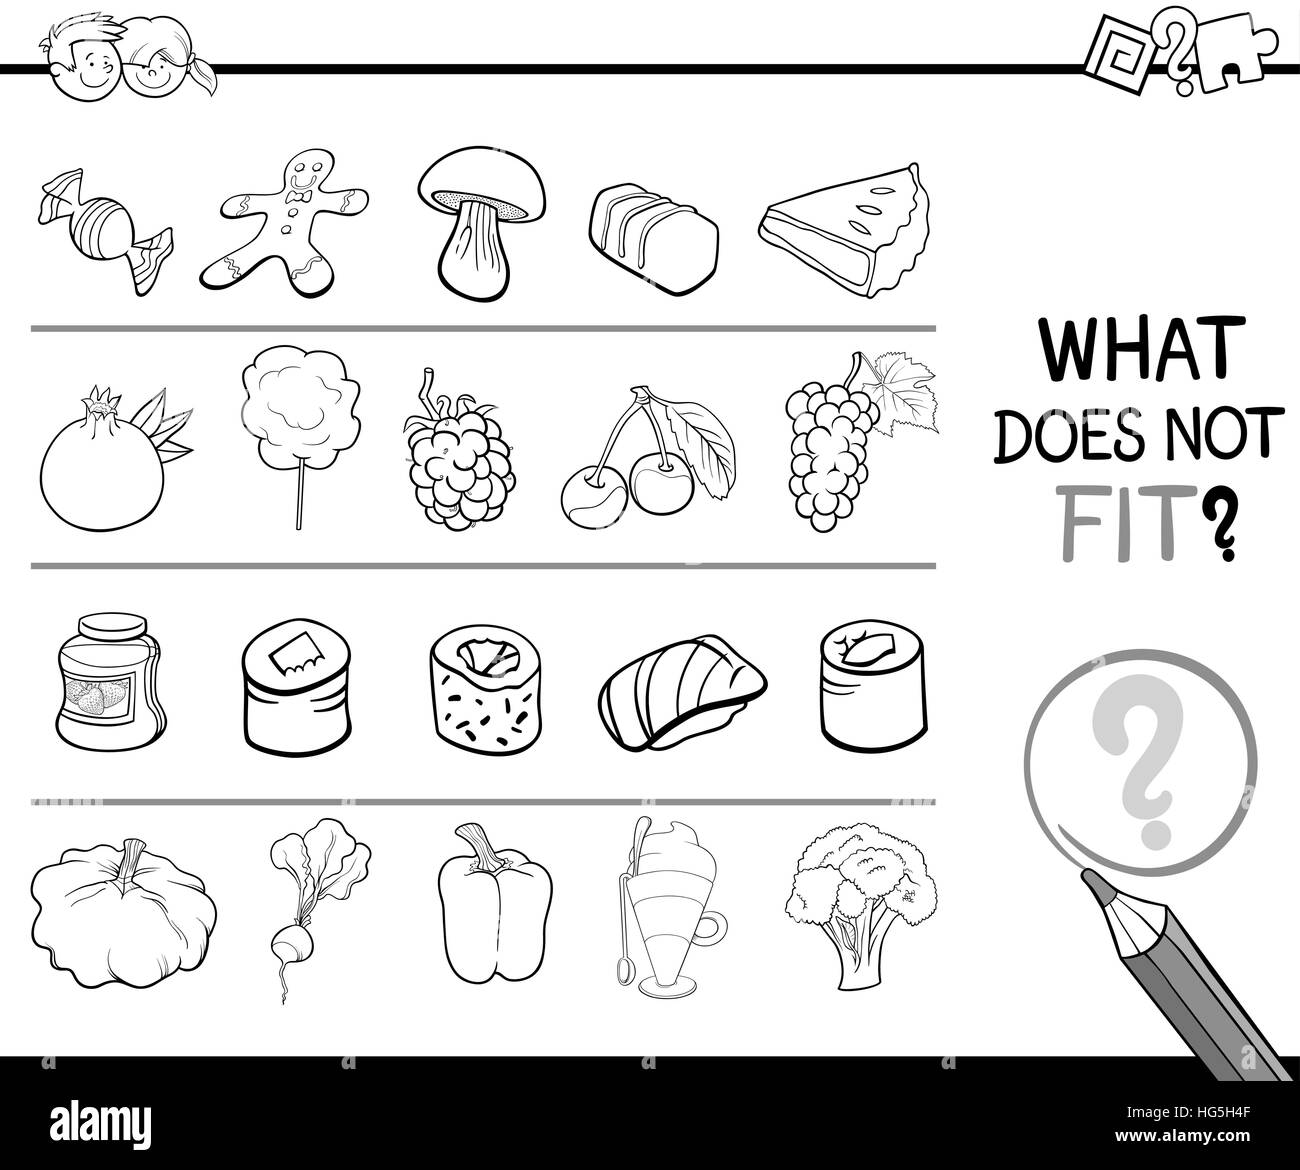 Black and White Cartoon Illustration of Finding Improper Picture in the Row Educational Activity for Children with Food Objects Coloring Page Stock Vector